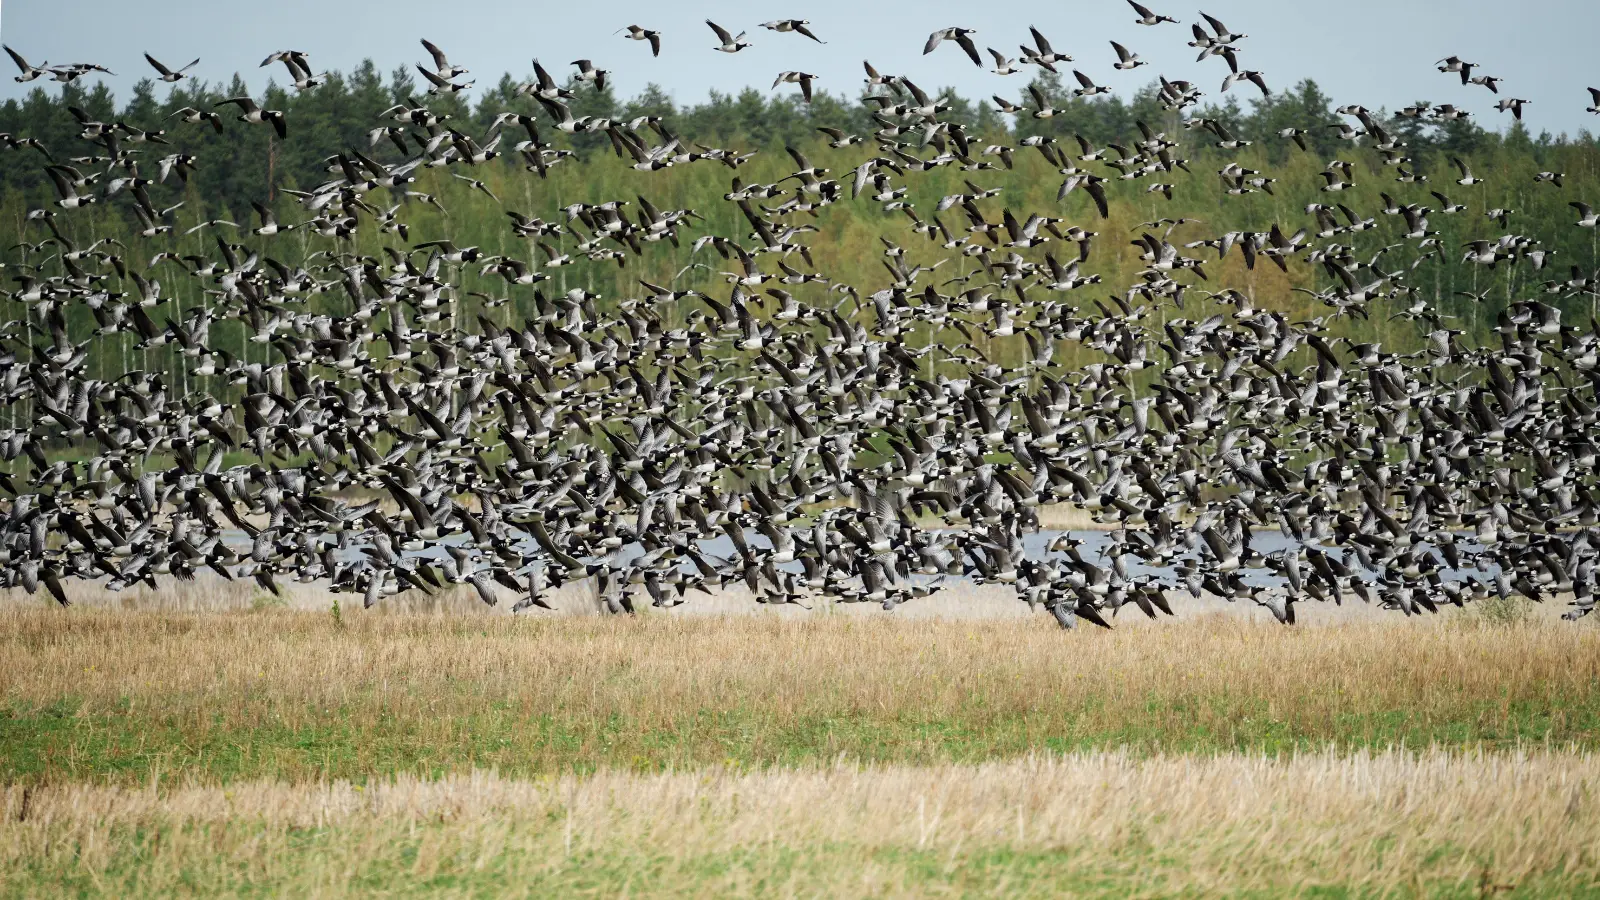 A flock of hundreds of geese taking off from a field